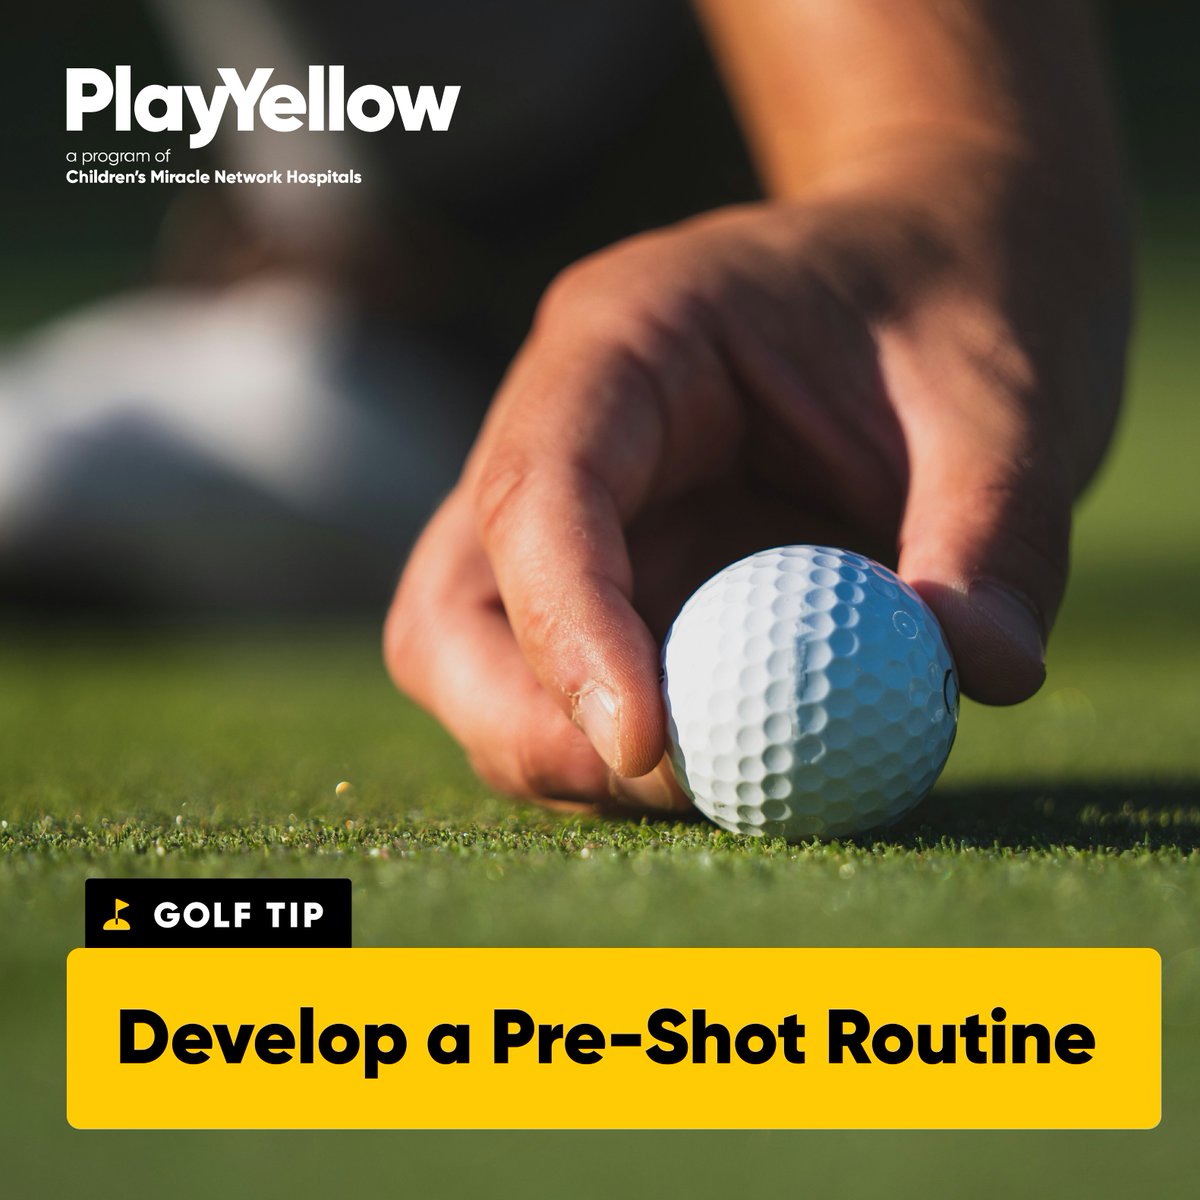 Consistency is key in #golf, and a pre-shot routine can help you stay focused and eliminate distractions. 🎯 Find a routine that works for you and stick to it! 👏 #PlayYellow #GolfTip